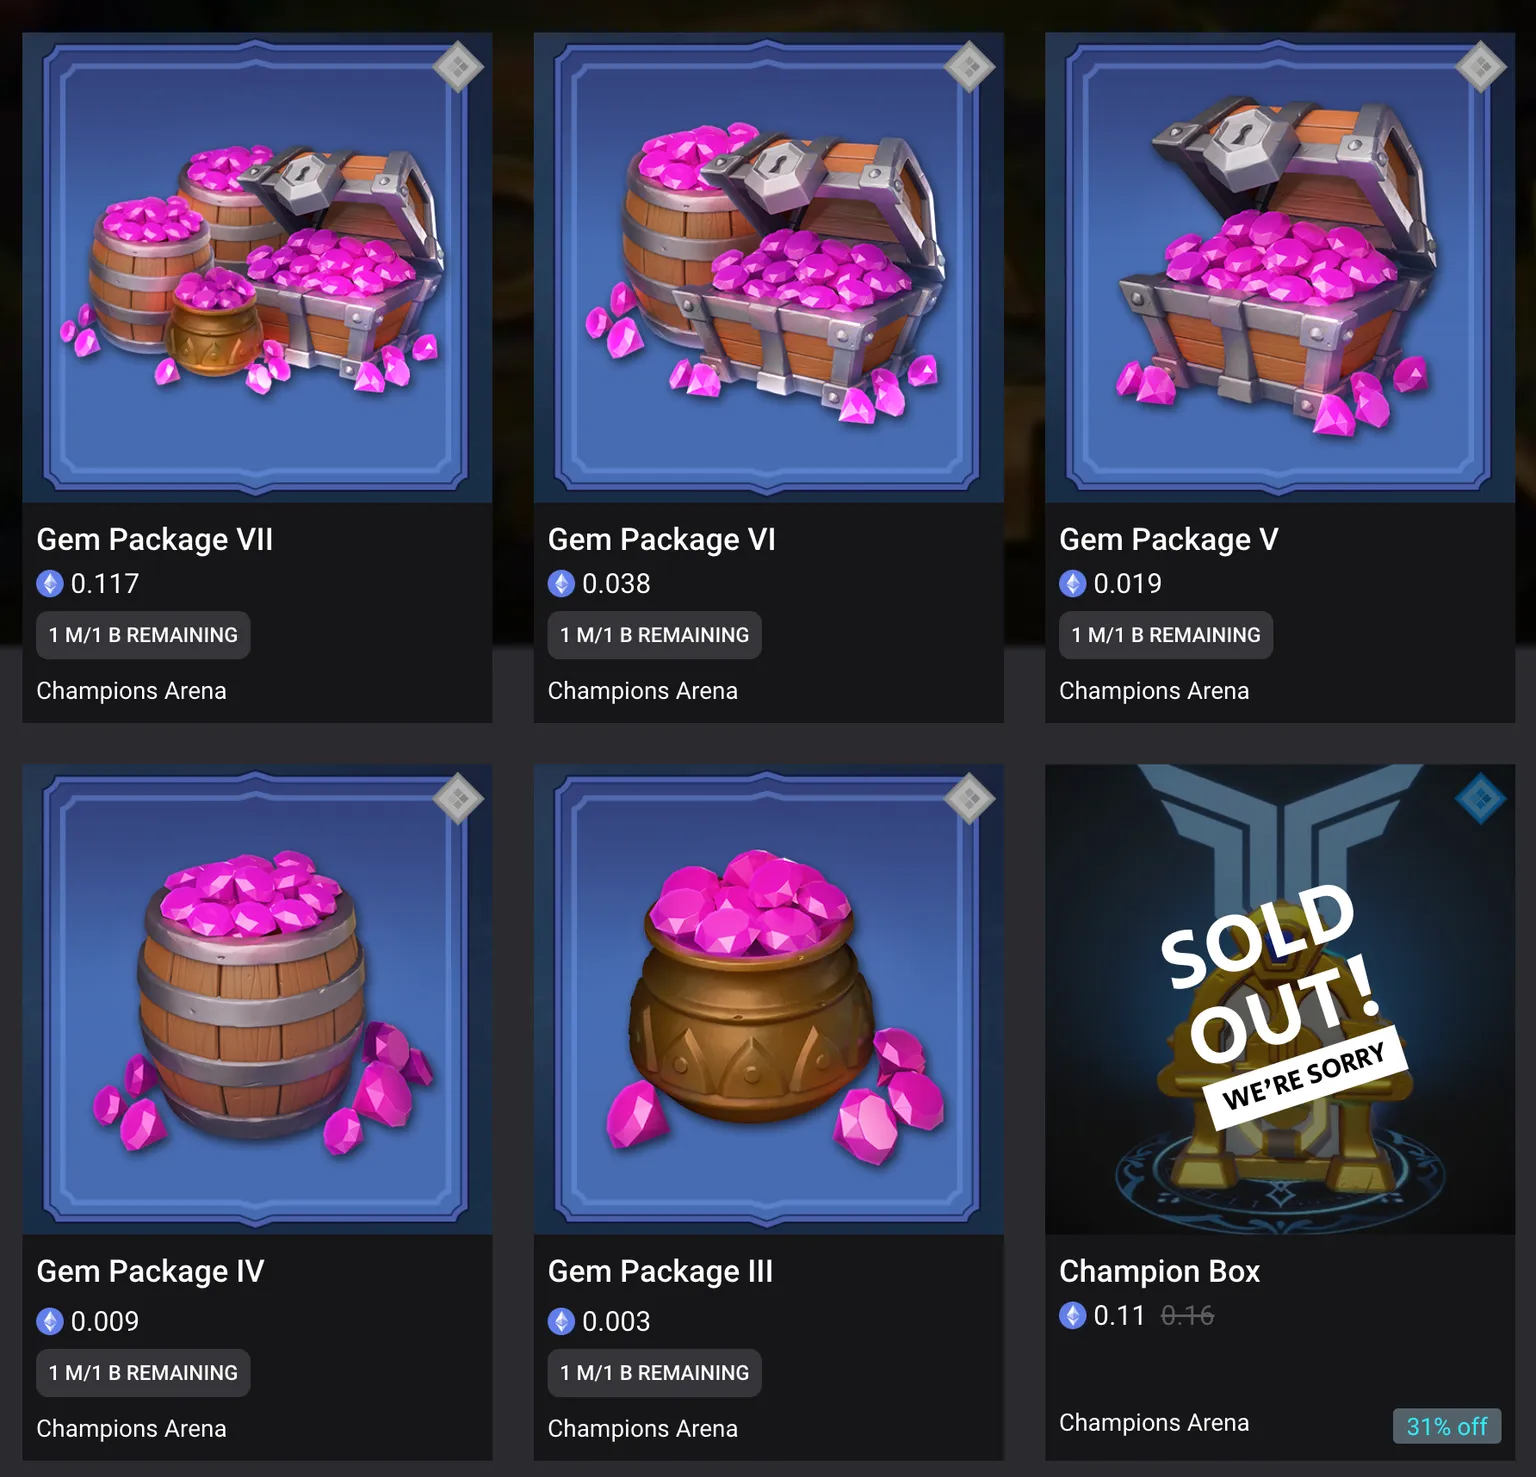 screenshot from Gala Games' website showing gem boxes with different varieties, priced in ETH.